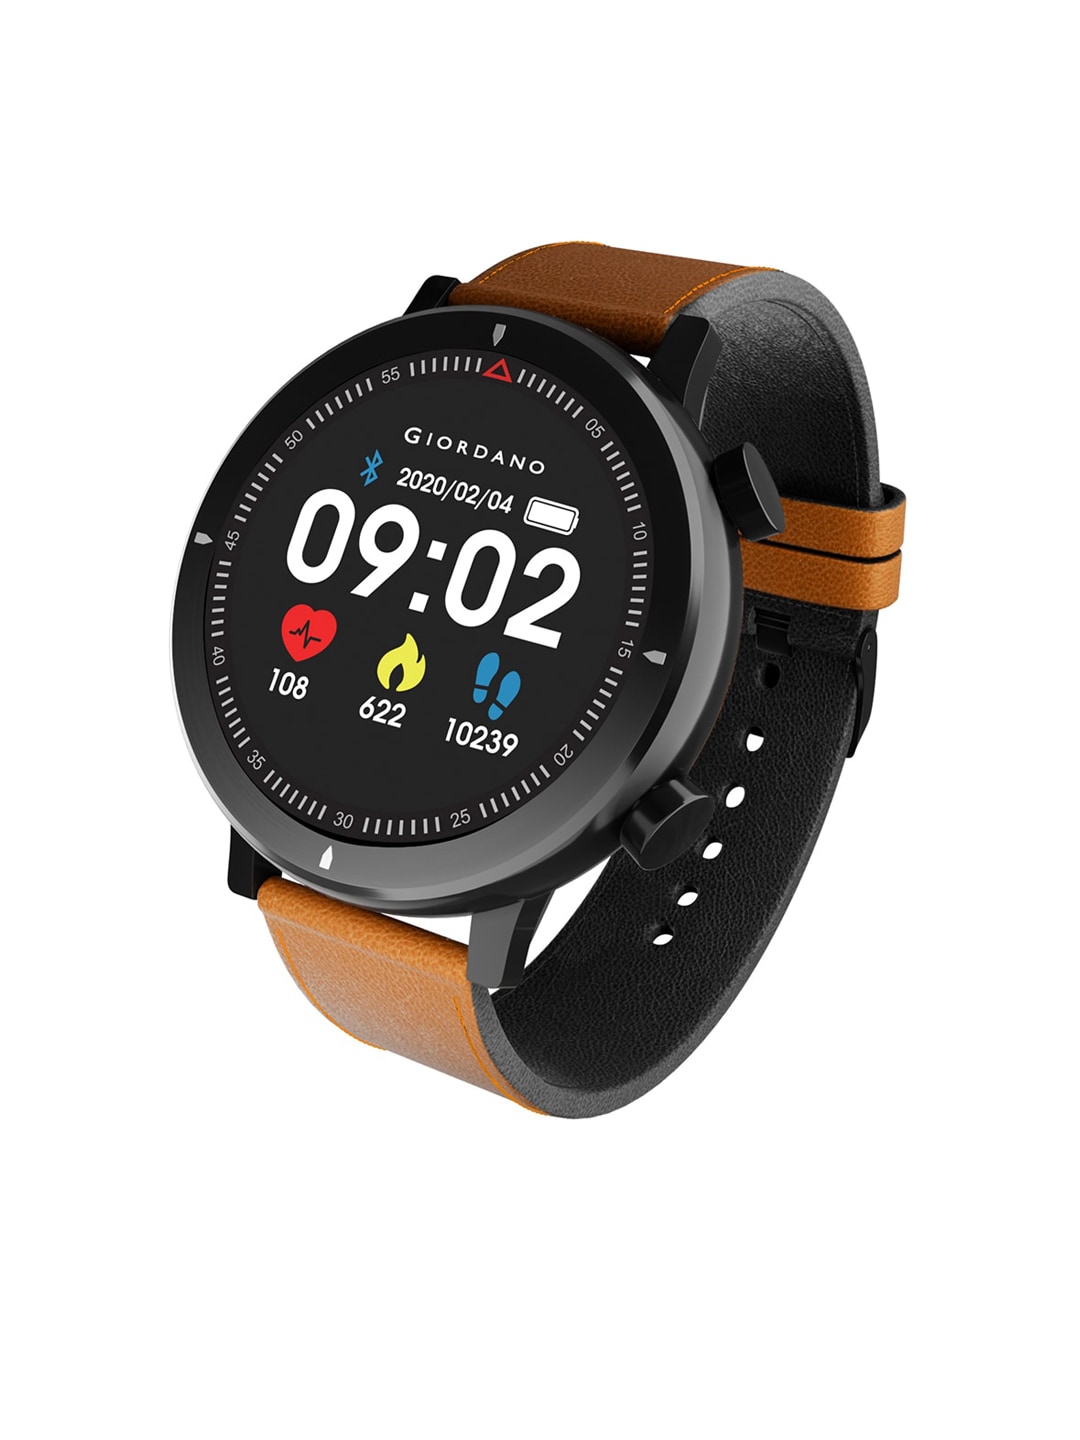 GIORDANO Brown & Black Solid Smart Watch GT03-BR Price in India